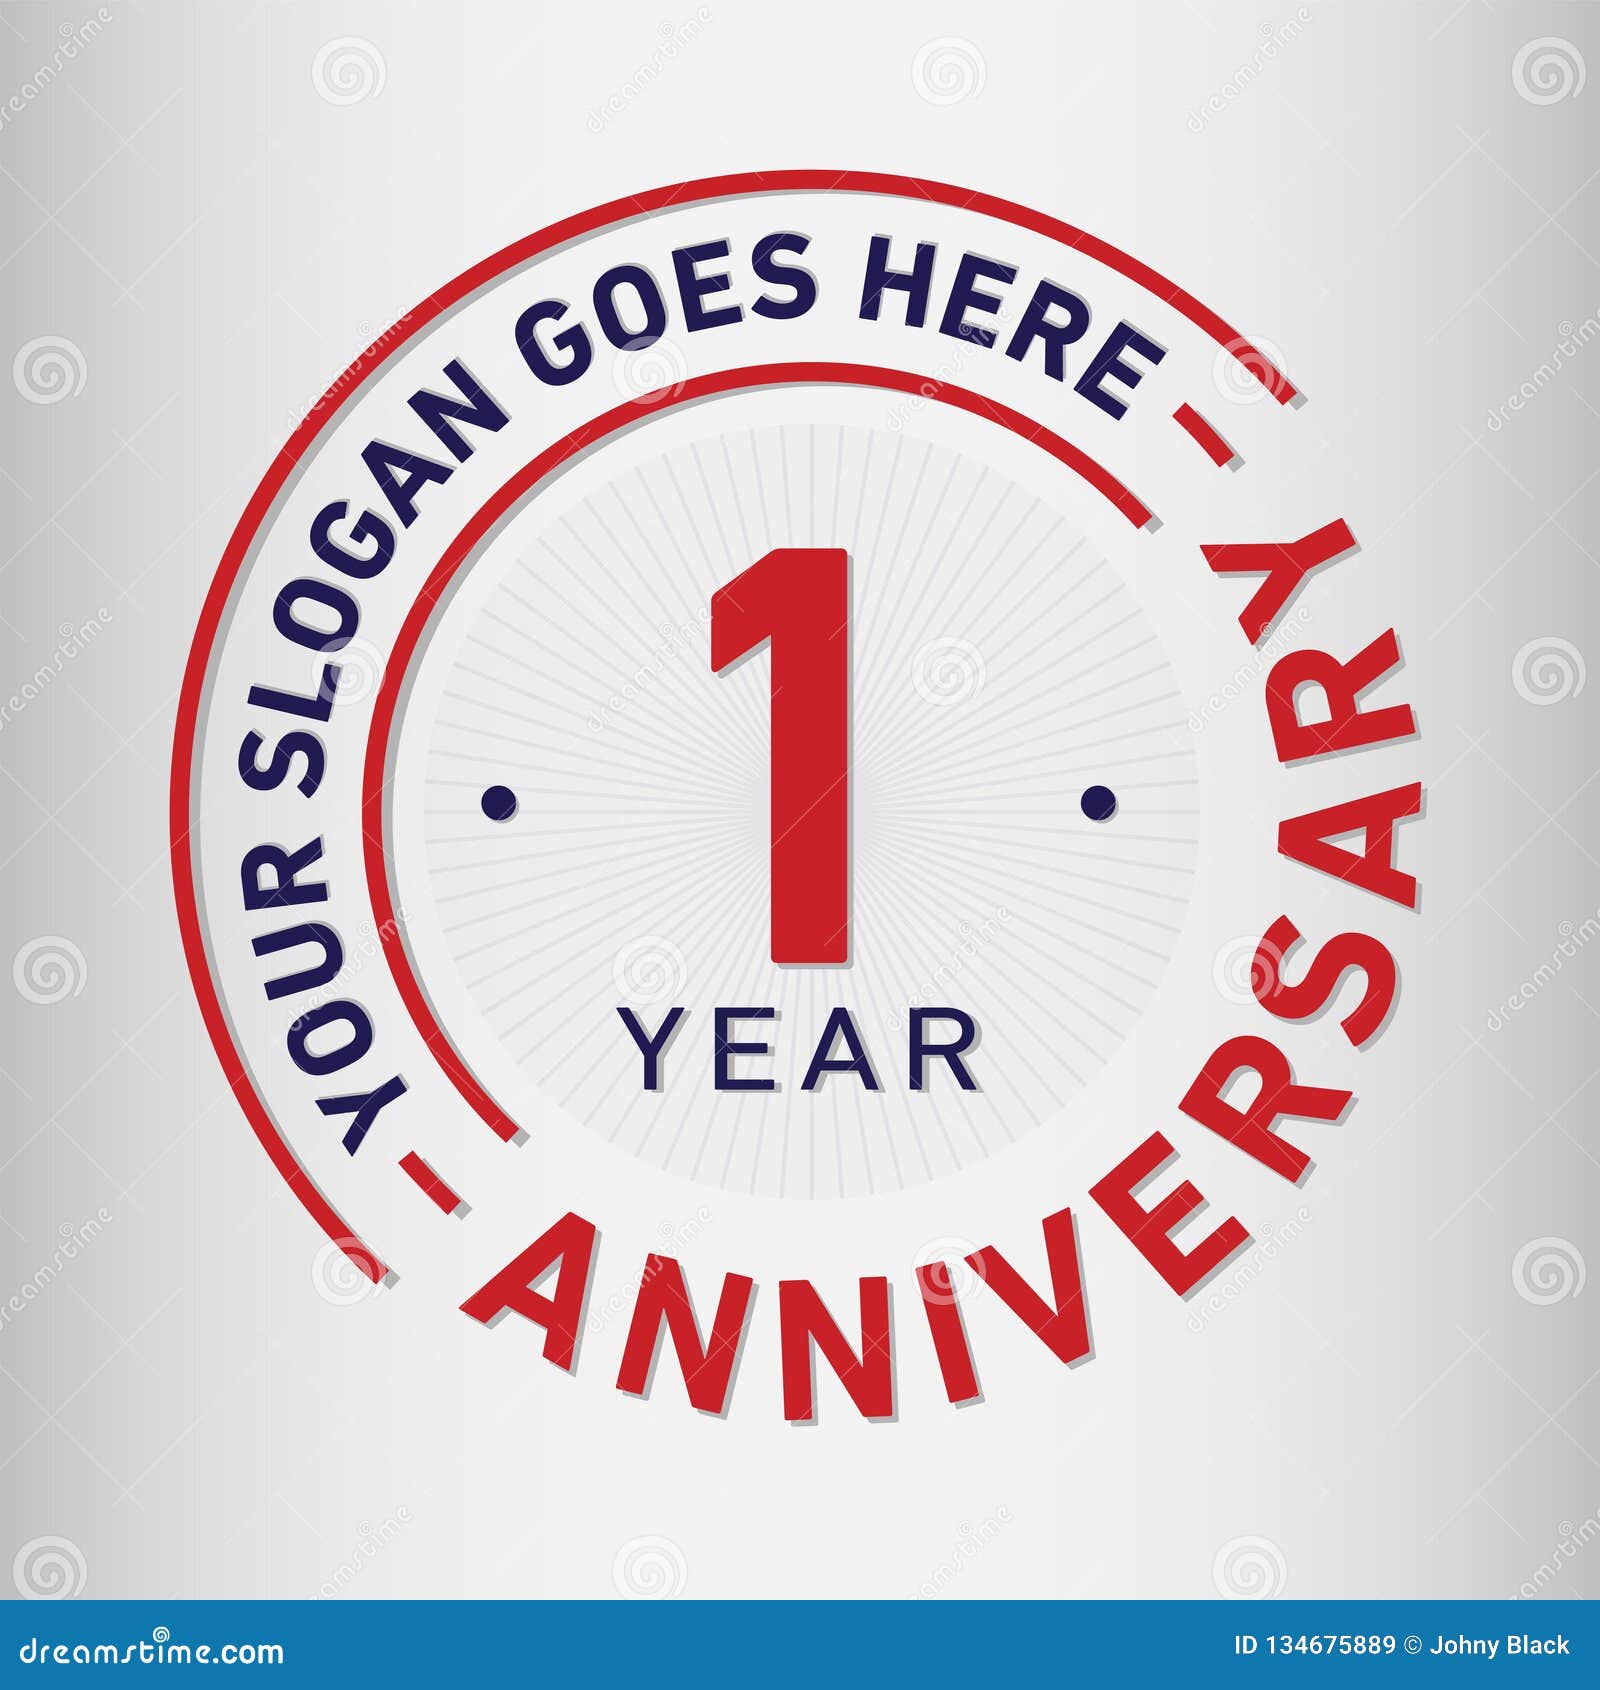 1 Year Anniversary Celebration Design Template. Anniversary Vector and ...